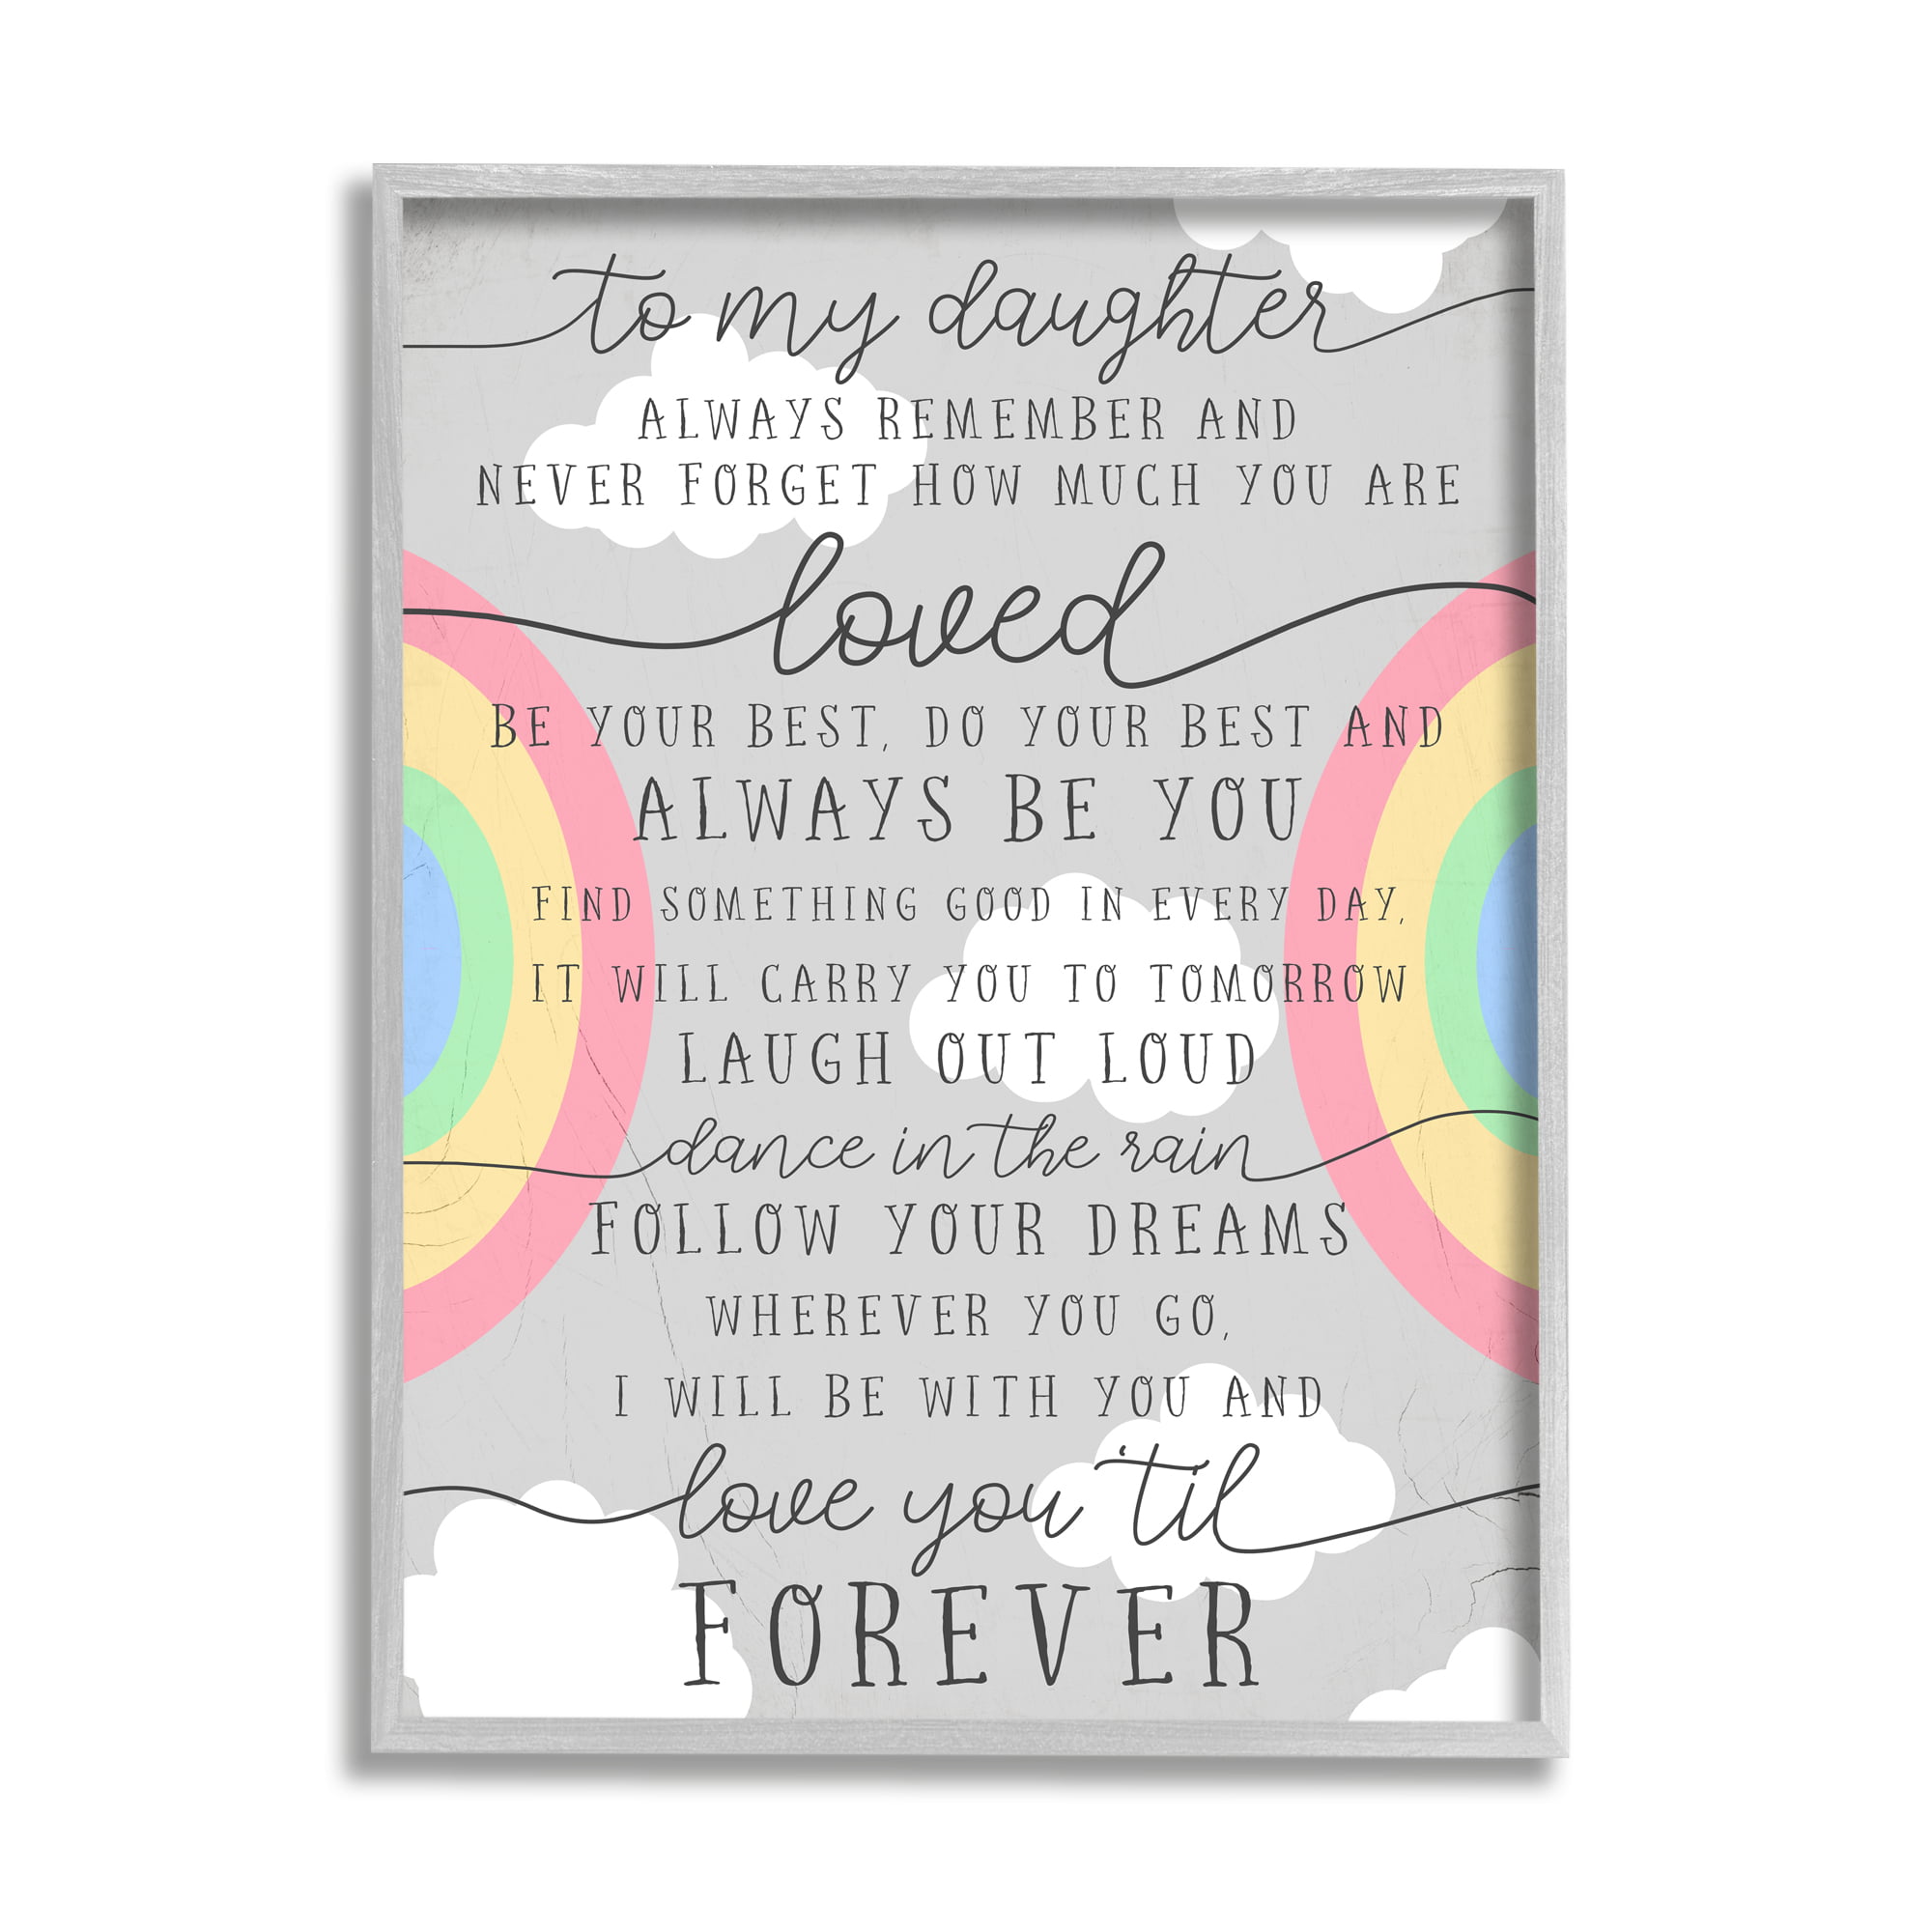 MUM DAD Wall/Door MDF Plaque OUR DEAR DAUGHTER ALWAYS REMEMBER WE LOVE YOU 